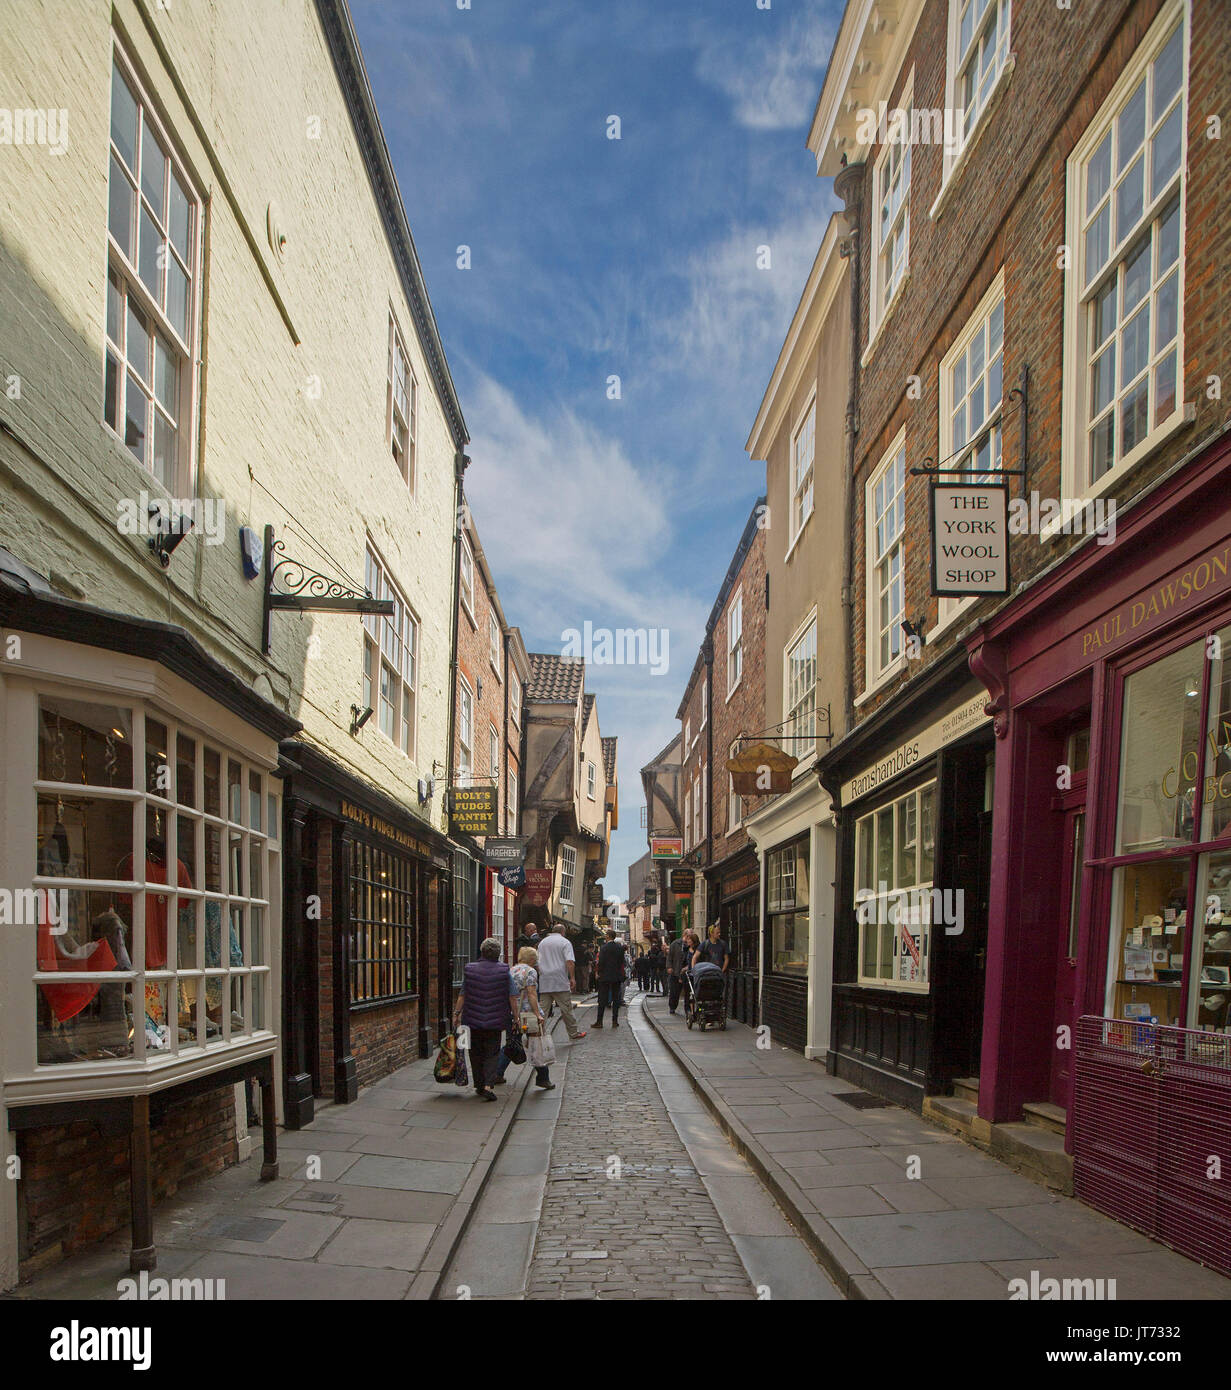 Historic shops lining ancient narrow cobbled street in The Shambles in city of York, England, with pedestrians wandering by. Stock Photo